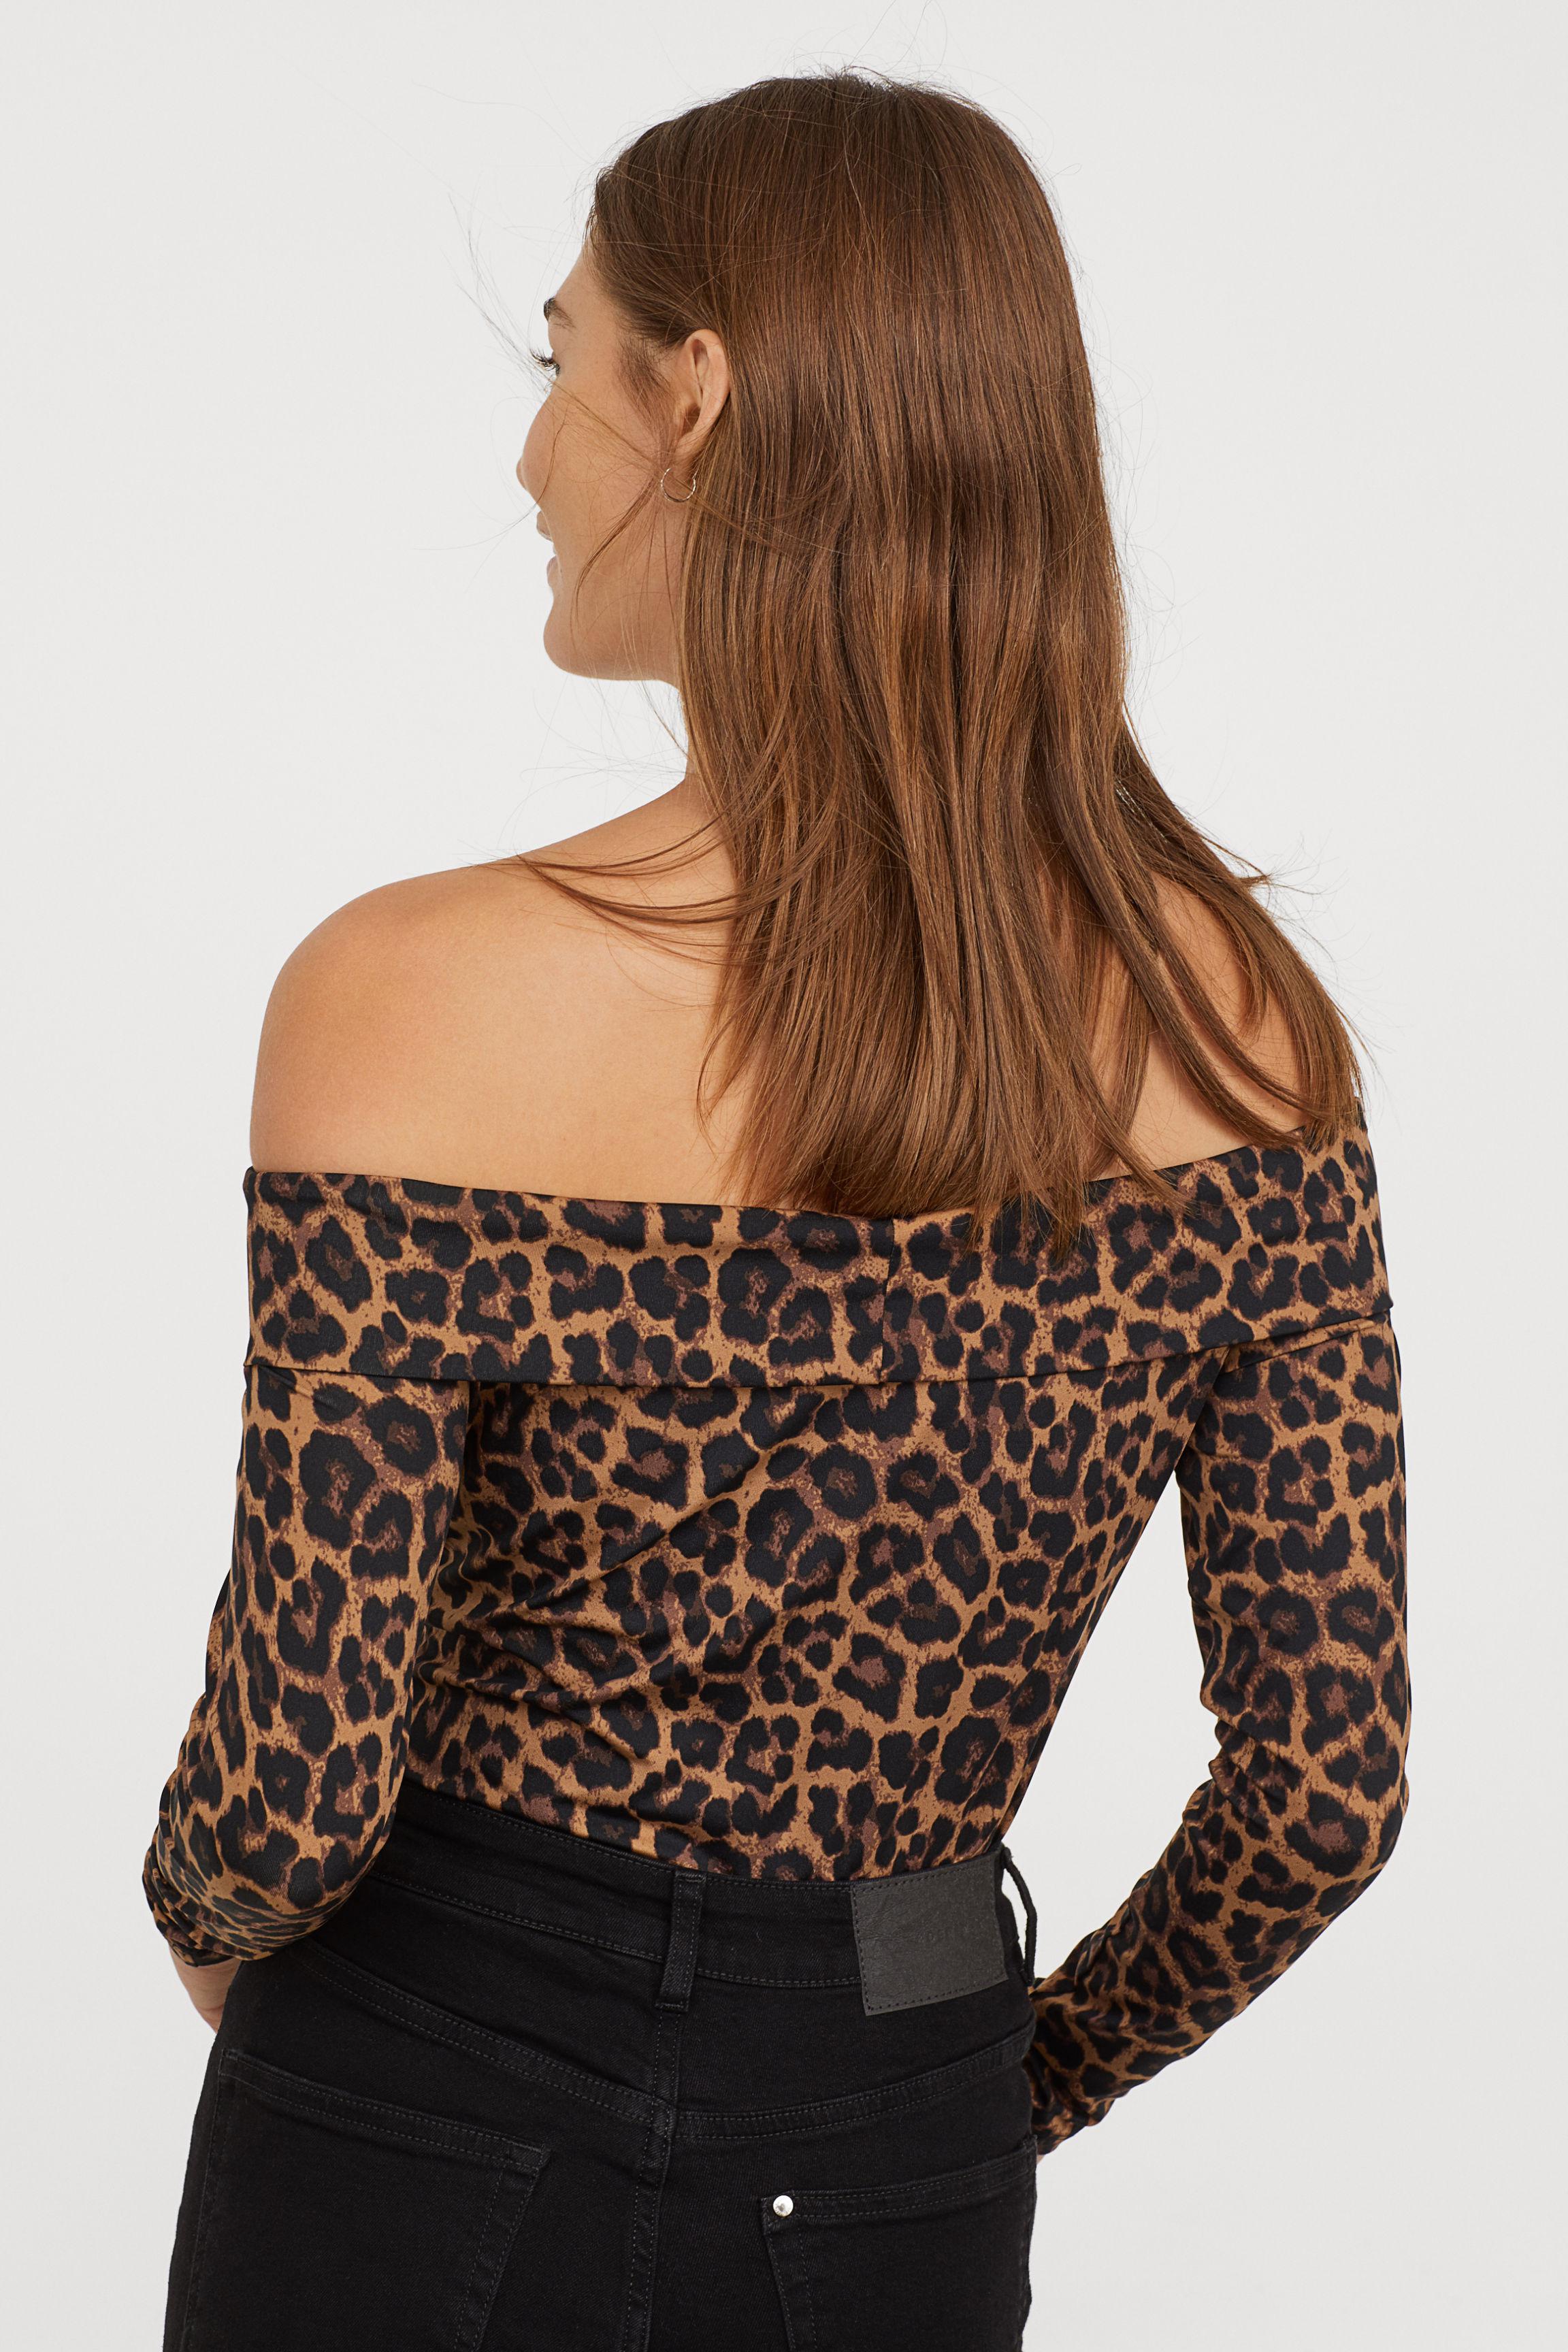 H&M Synthetic Off-the-shoulder Top in Beige/Leopard Print (Brown) | Lyst